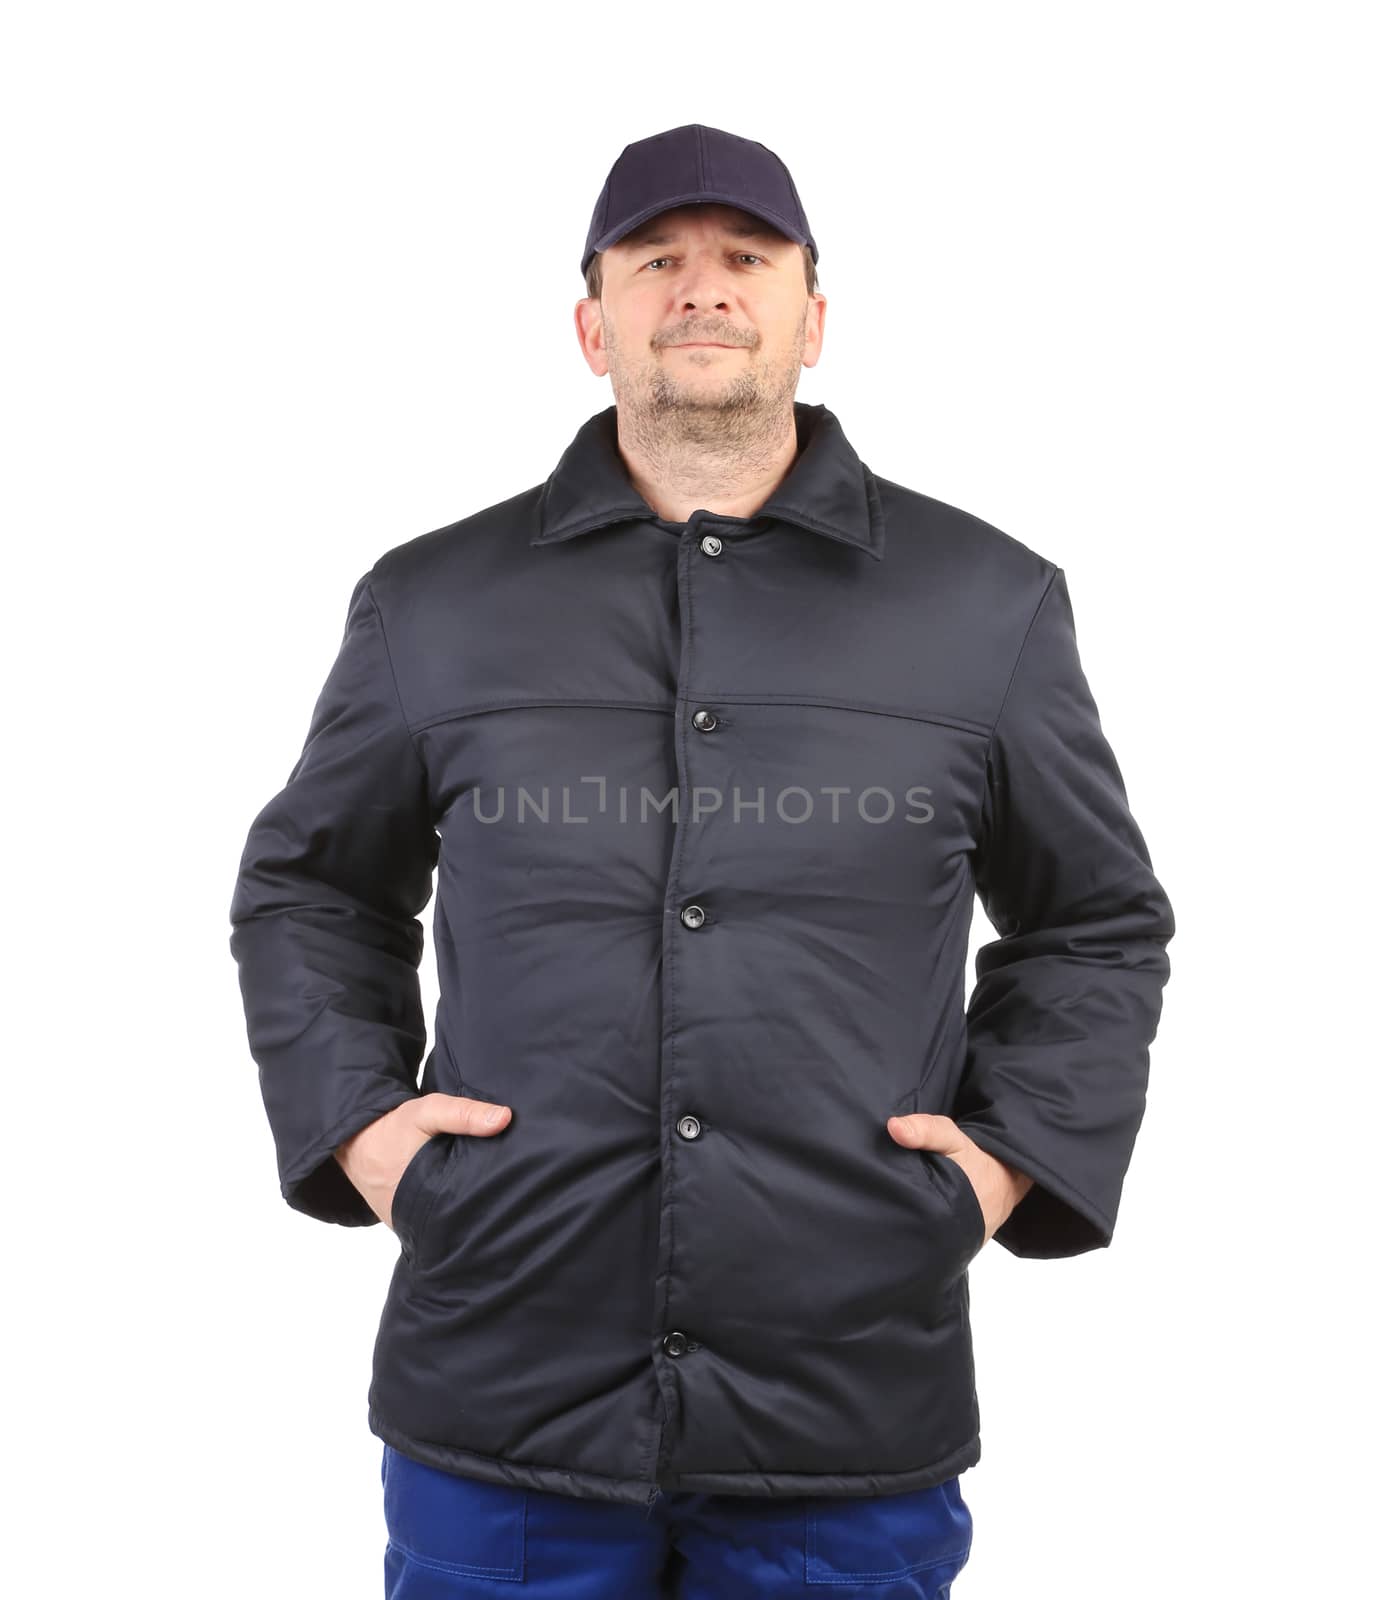 Worker in winter workwear. Isolated on a white background.